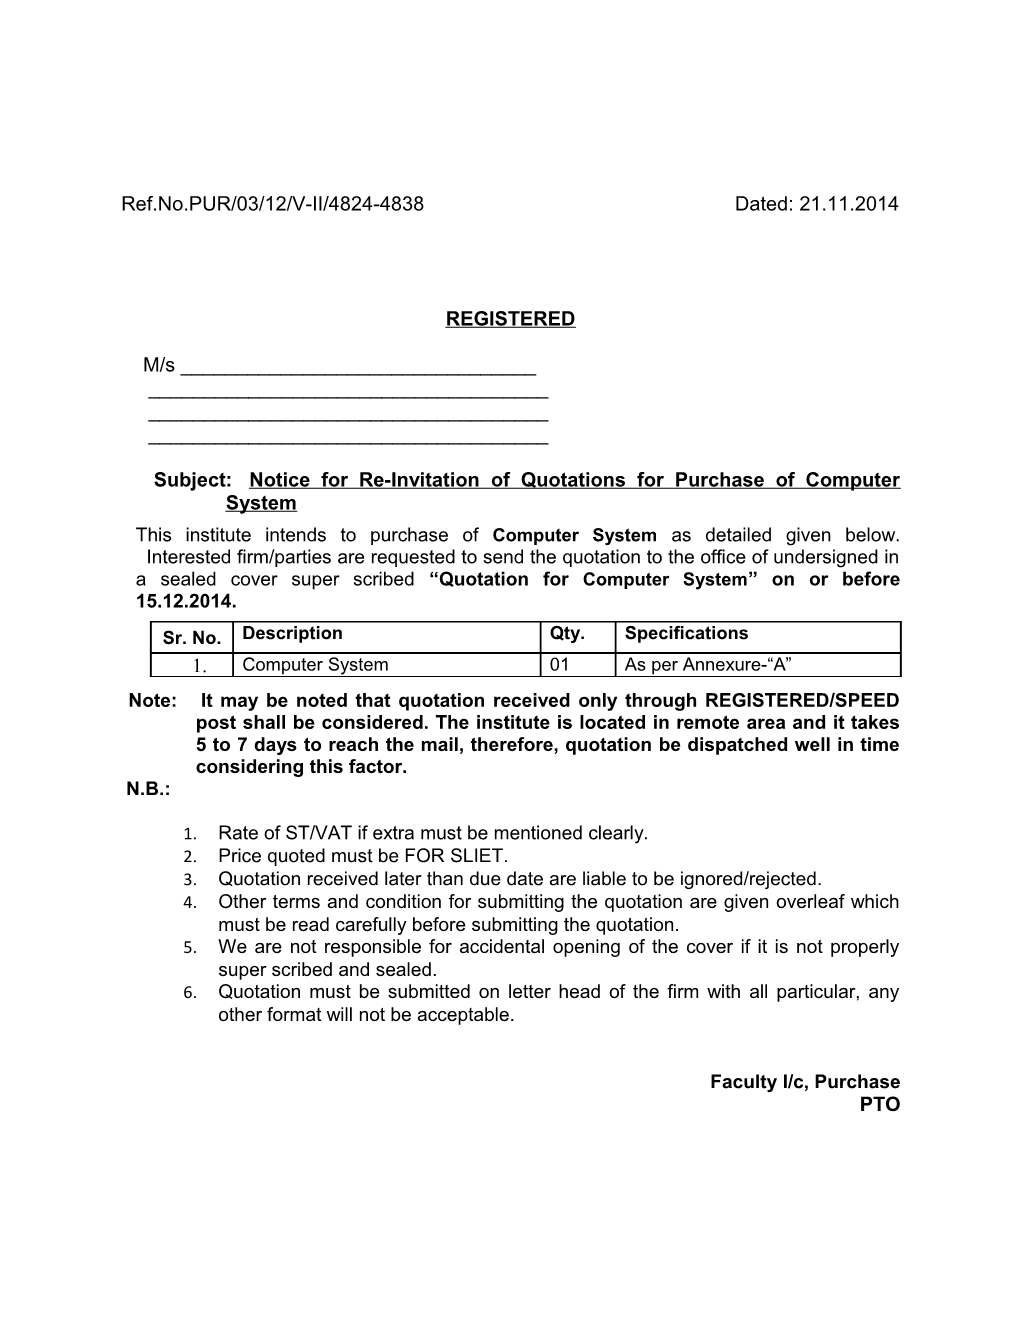 Subject:Notice for Re-Invitation of Quotations for Purchase of Computer System